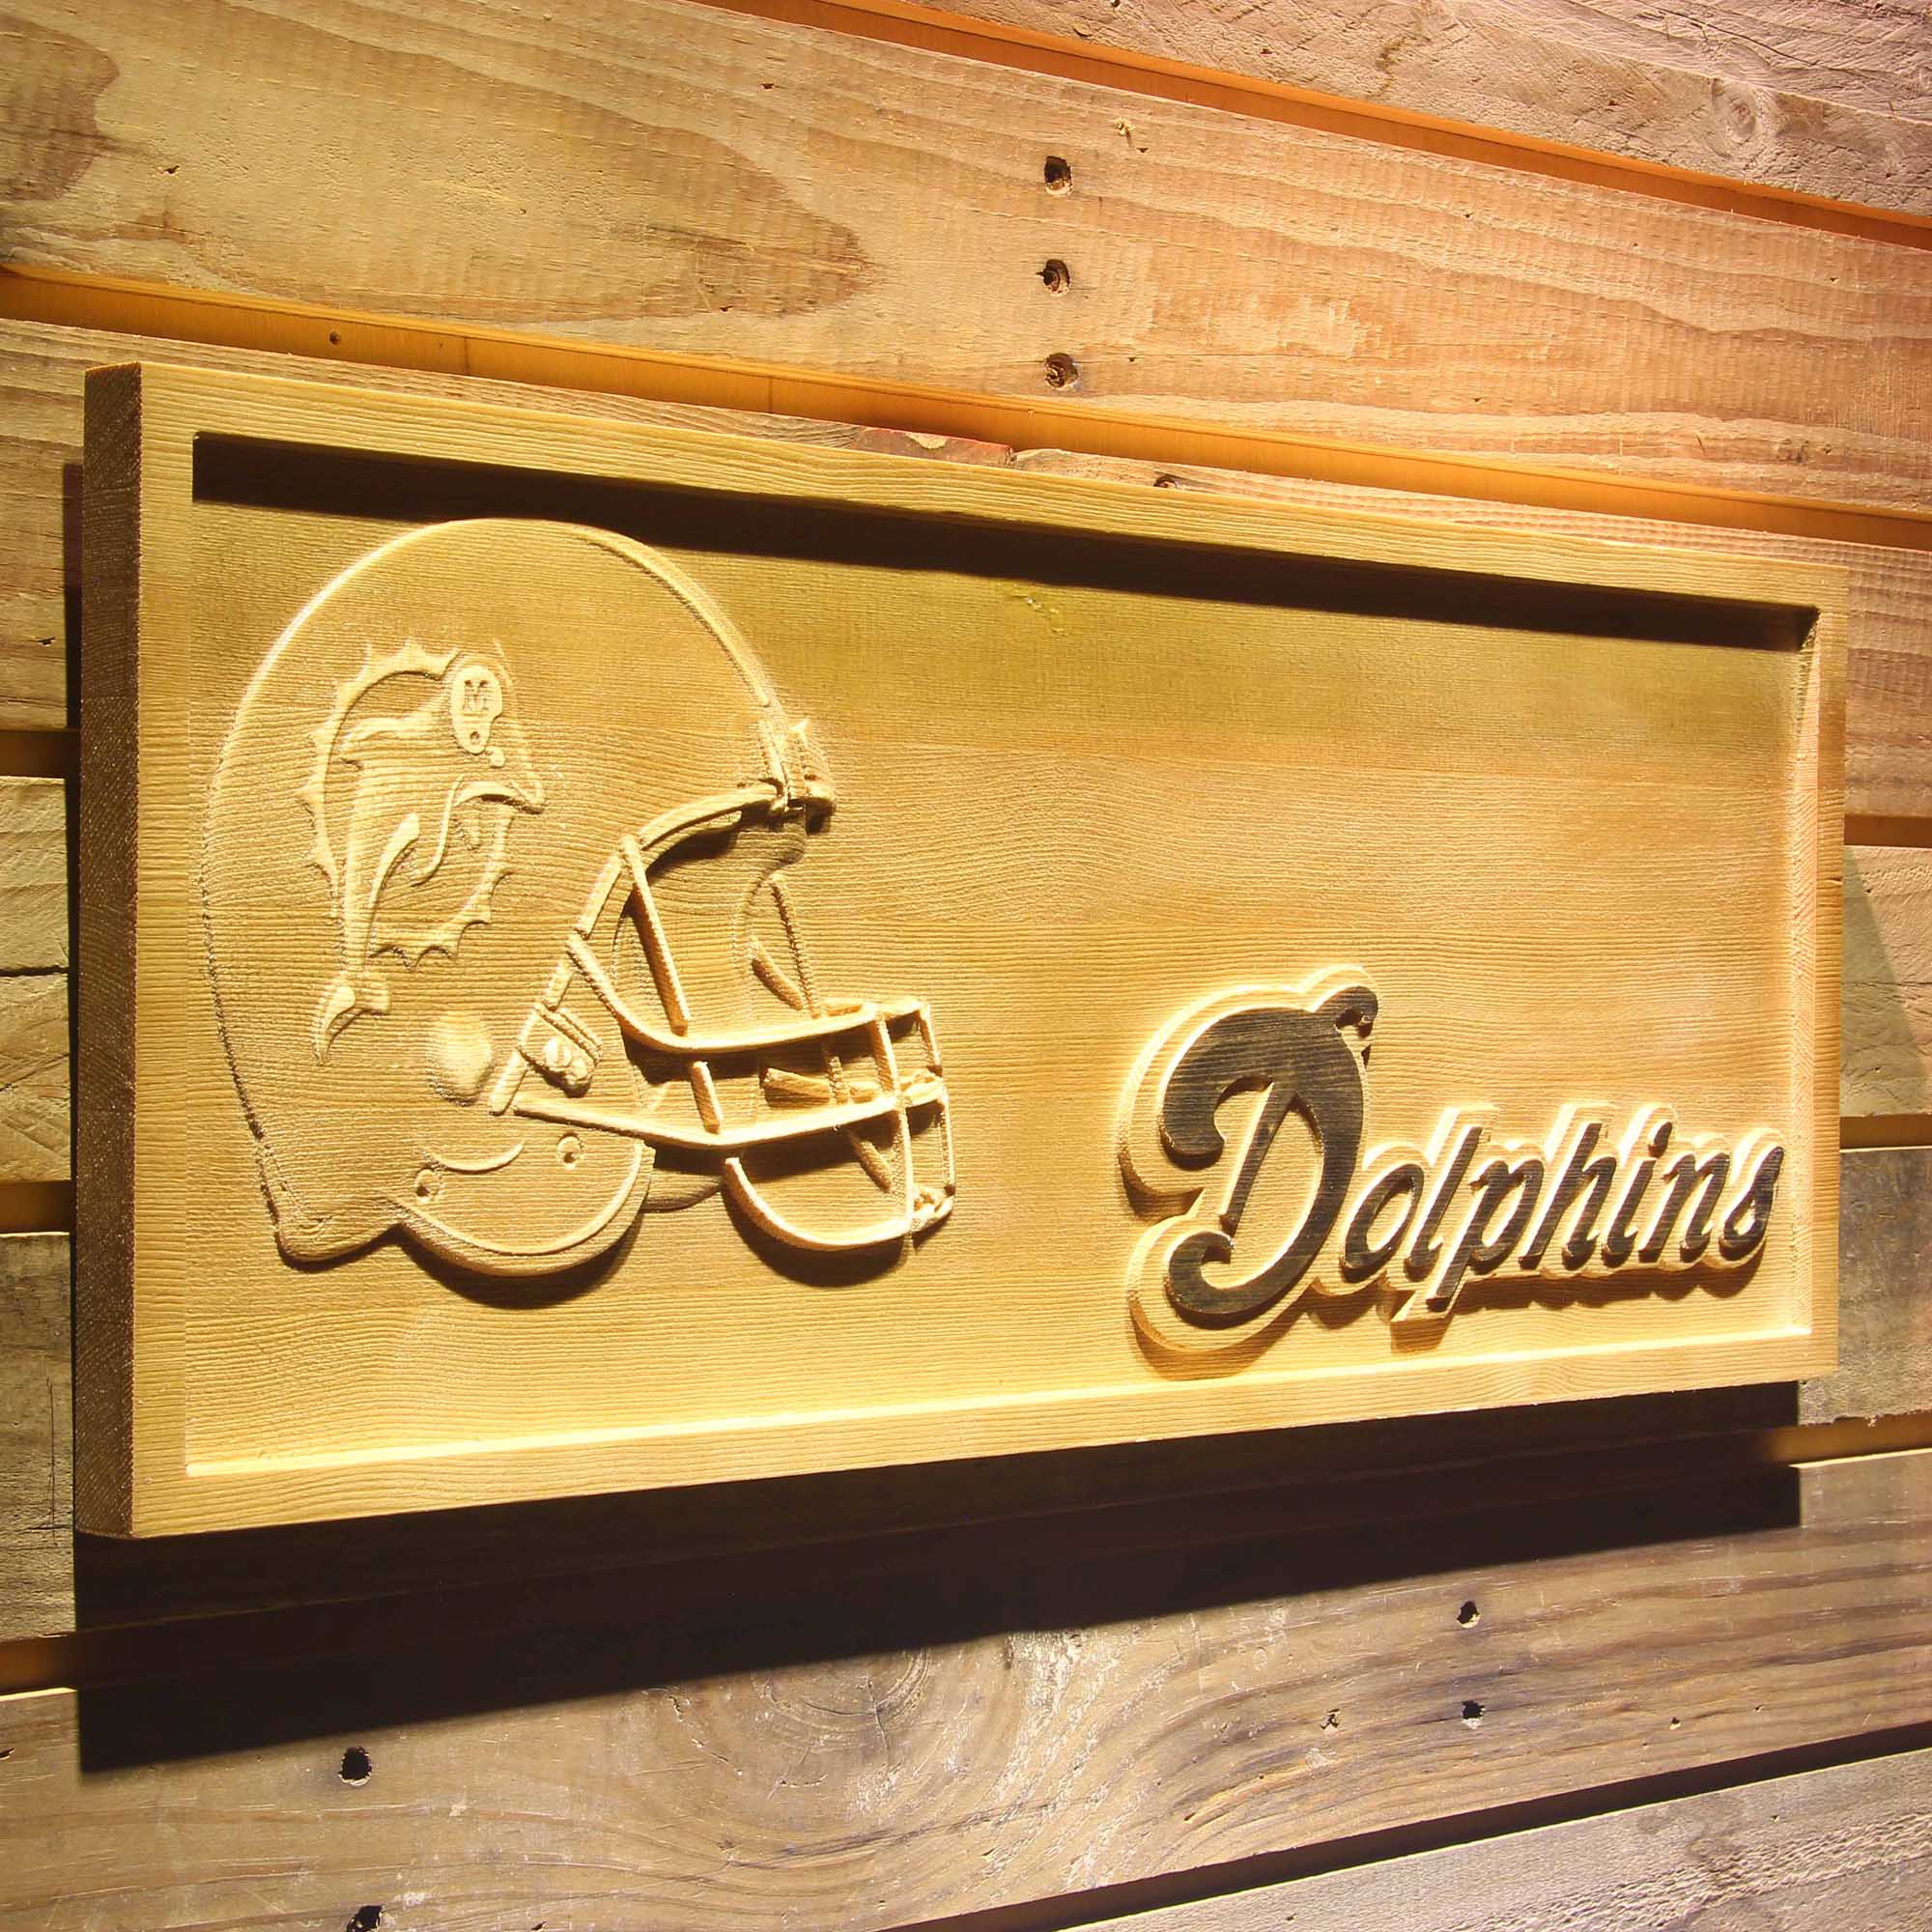 Miami Dolphins Helmet 3D Wooden Engrave Sign